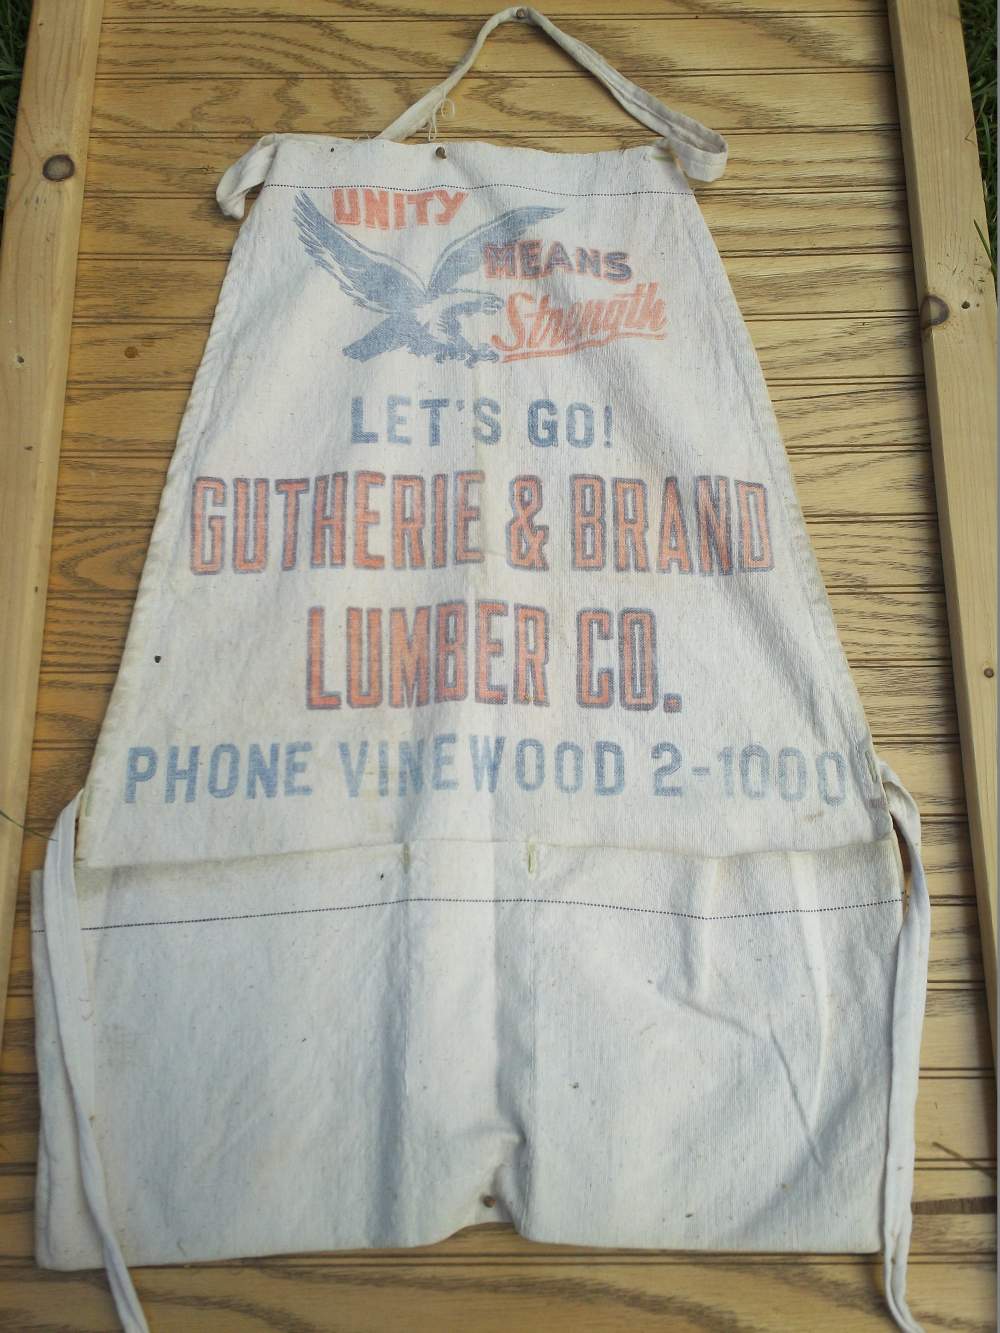 Name:  GLC Gutherie and Brand Lumber.jpg
Views: 843
Size:  142.7 KB